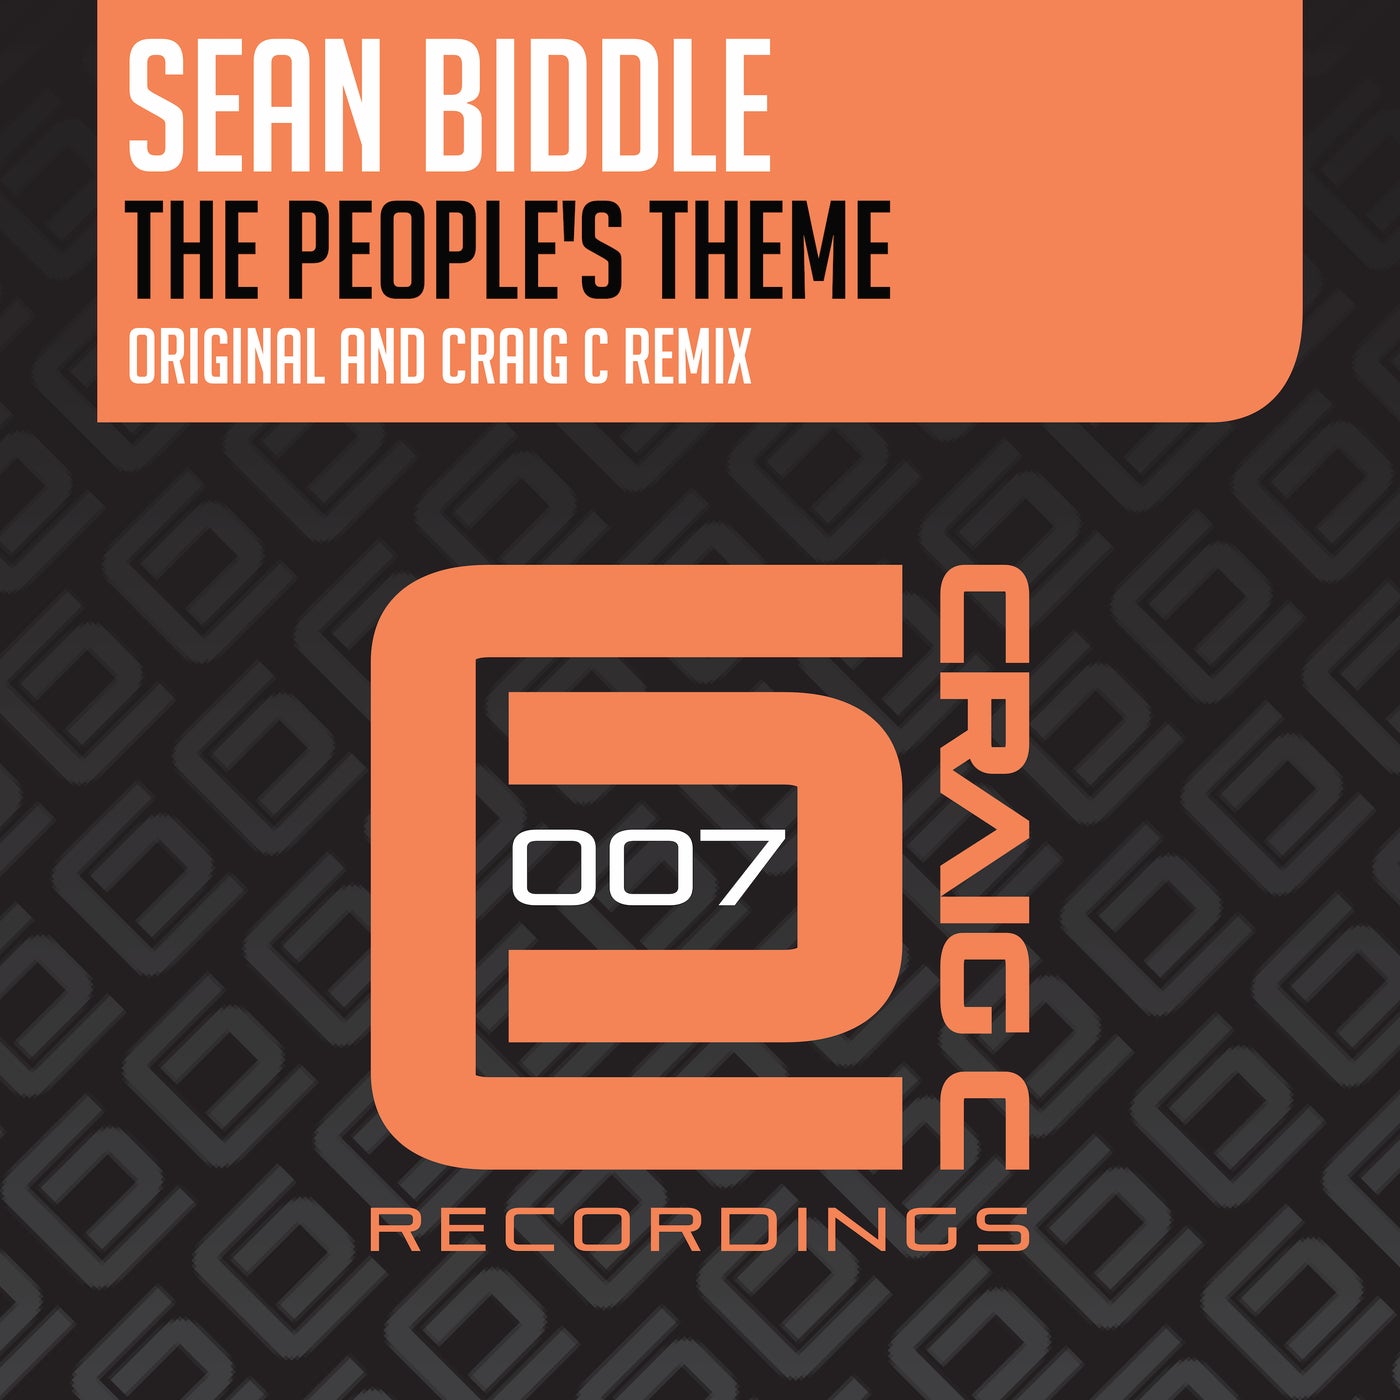 The People's Theme